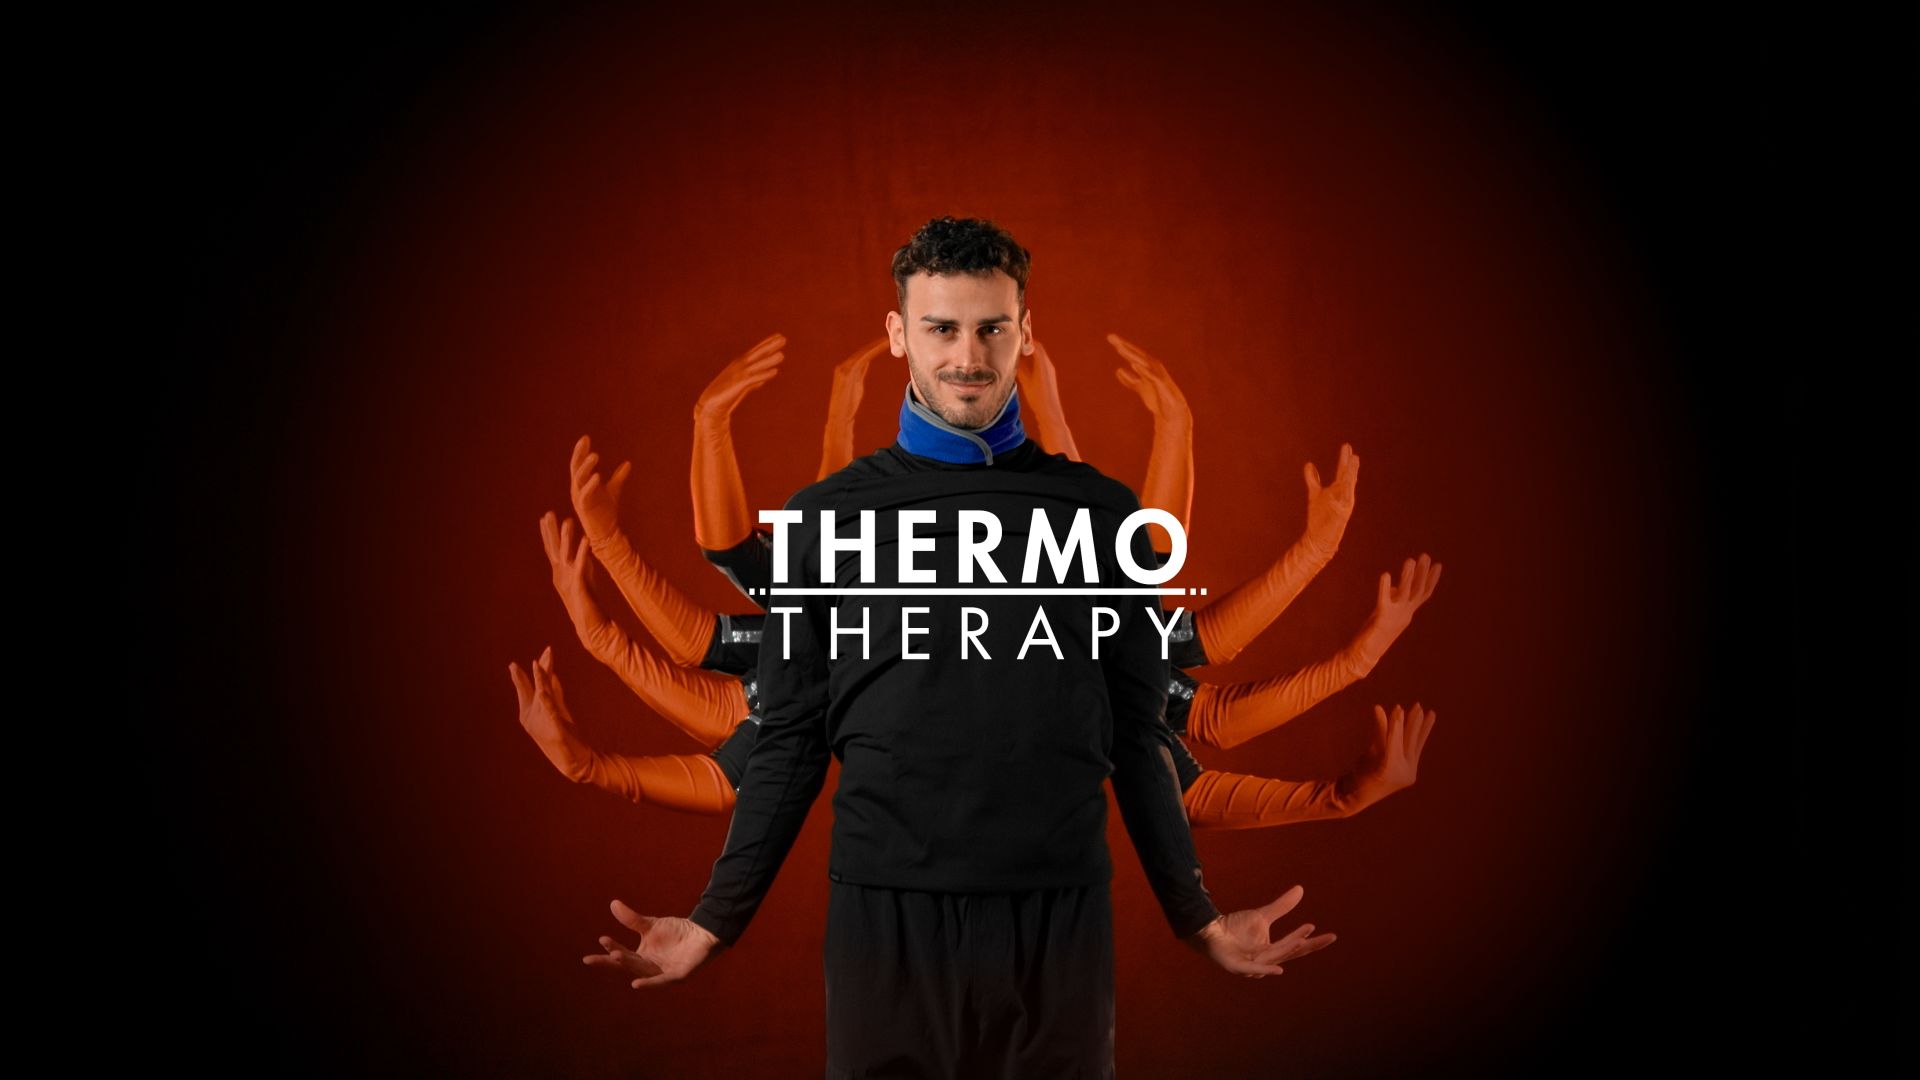 <strong>ThermoTherapy heats up TV and social networks with the new ad created by inTesta</strong>